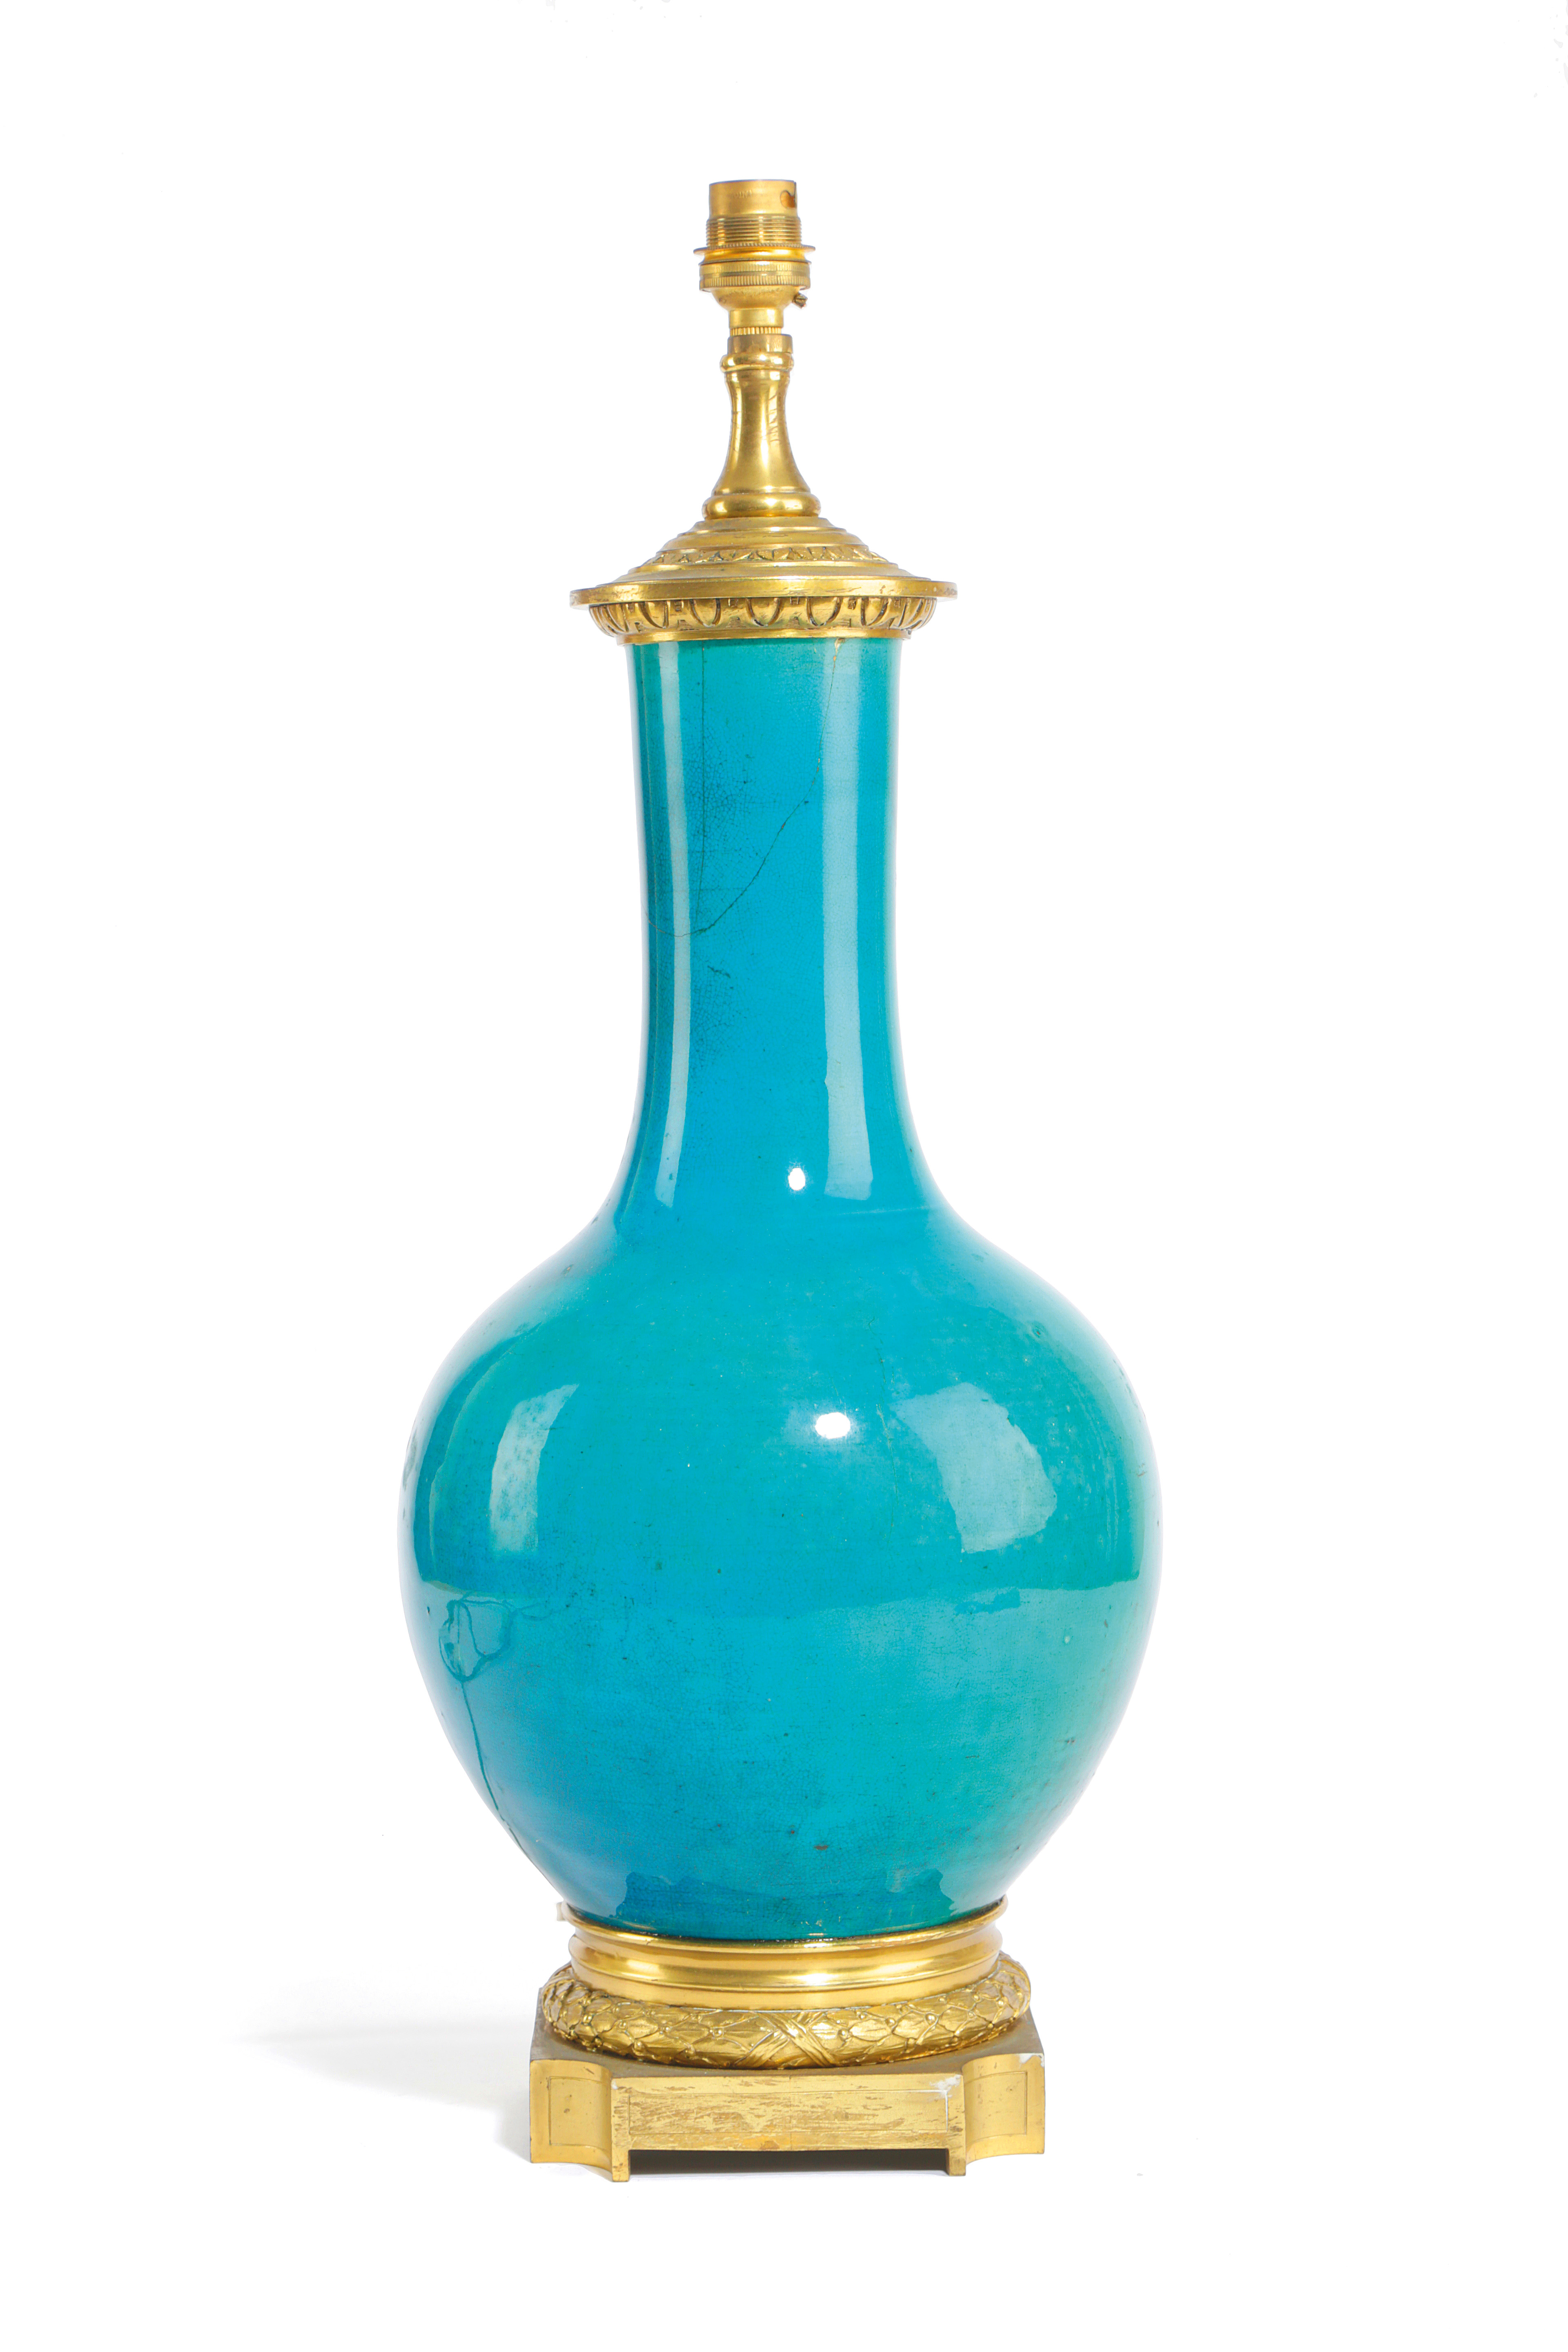 A CHINESE PORCELAIN VASE TABLE LAMP 19TH CENTURY the turquoise glazed body with stiff leaf and